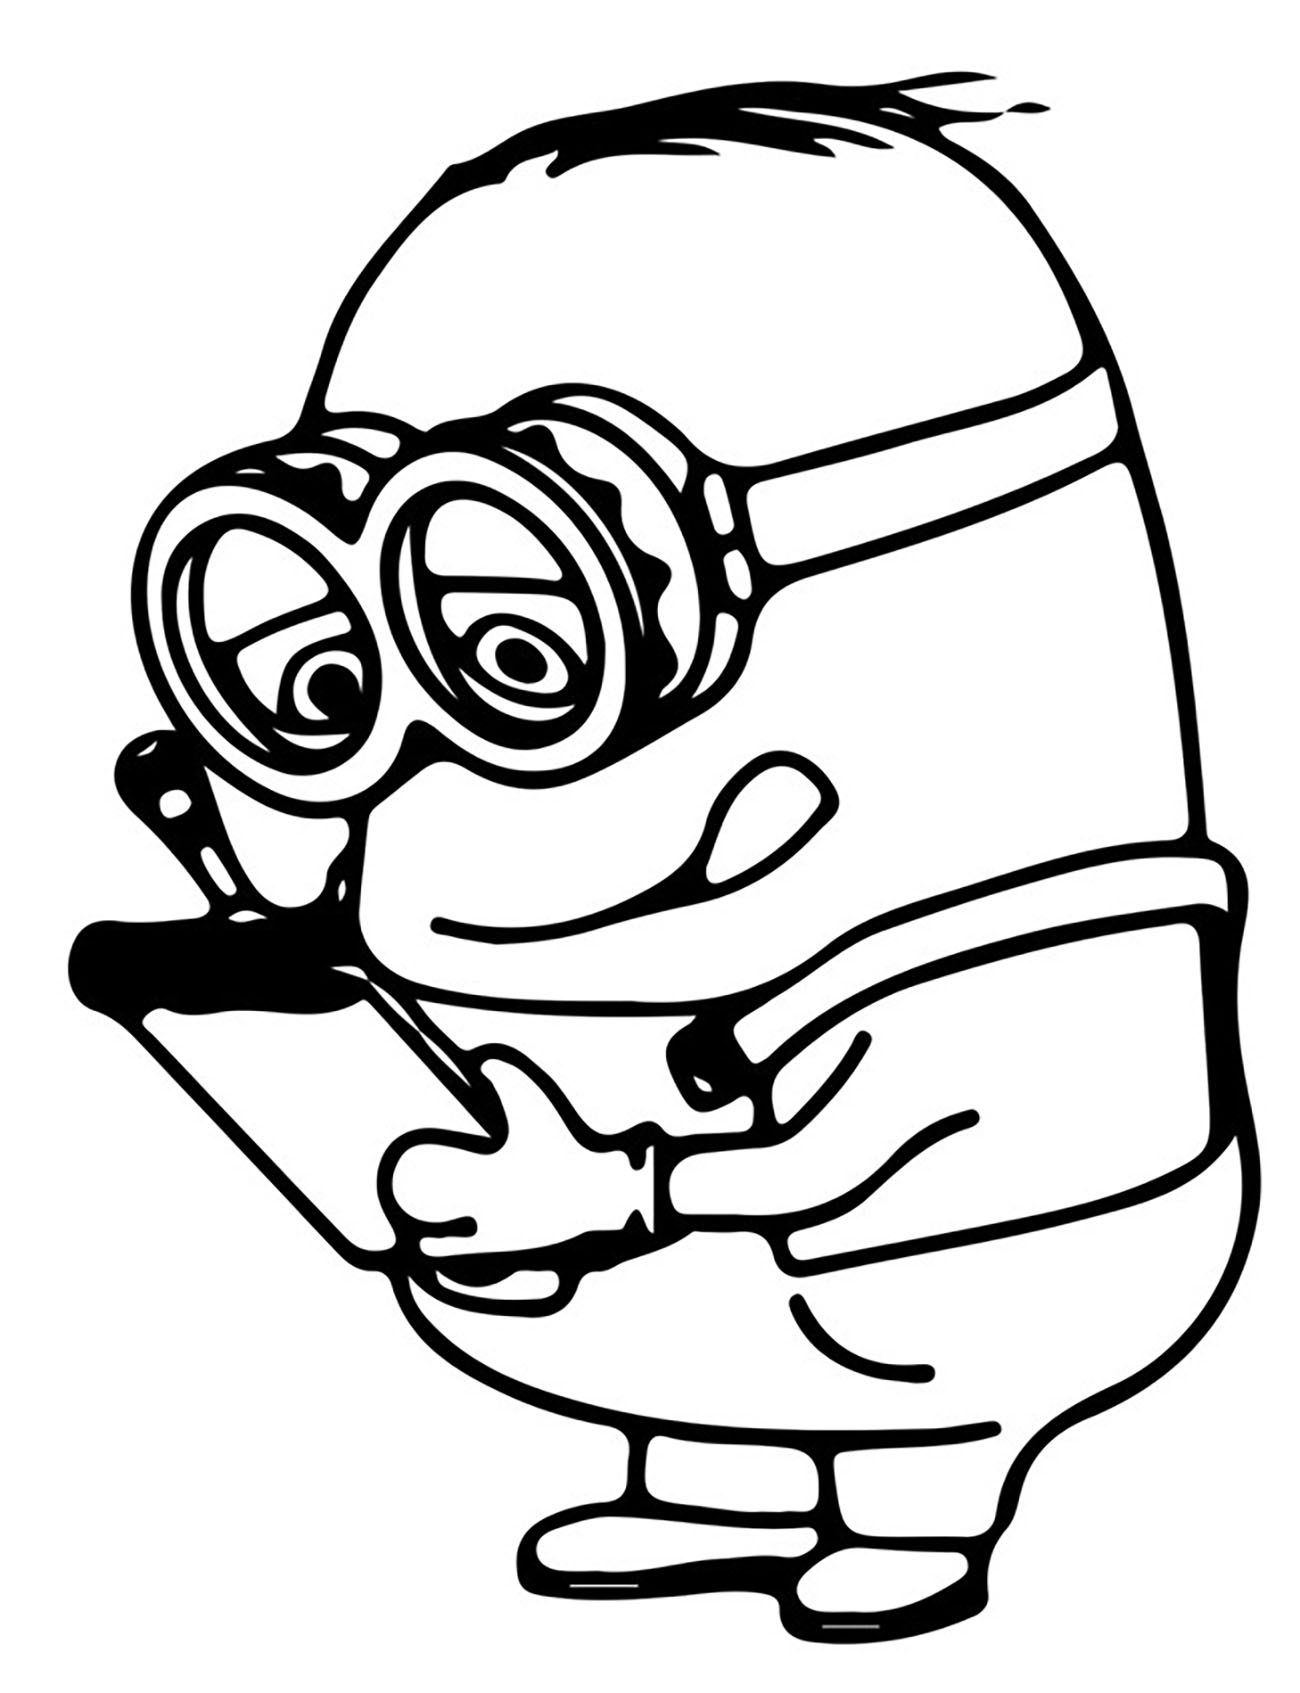 Easy coloring picture of Minions for kids